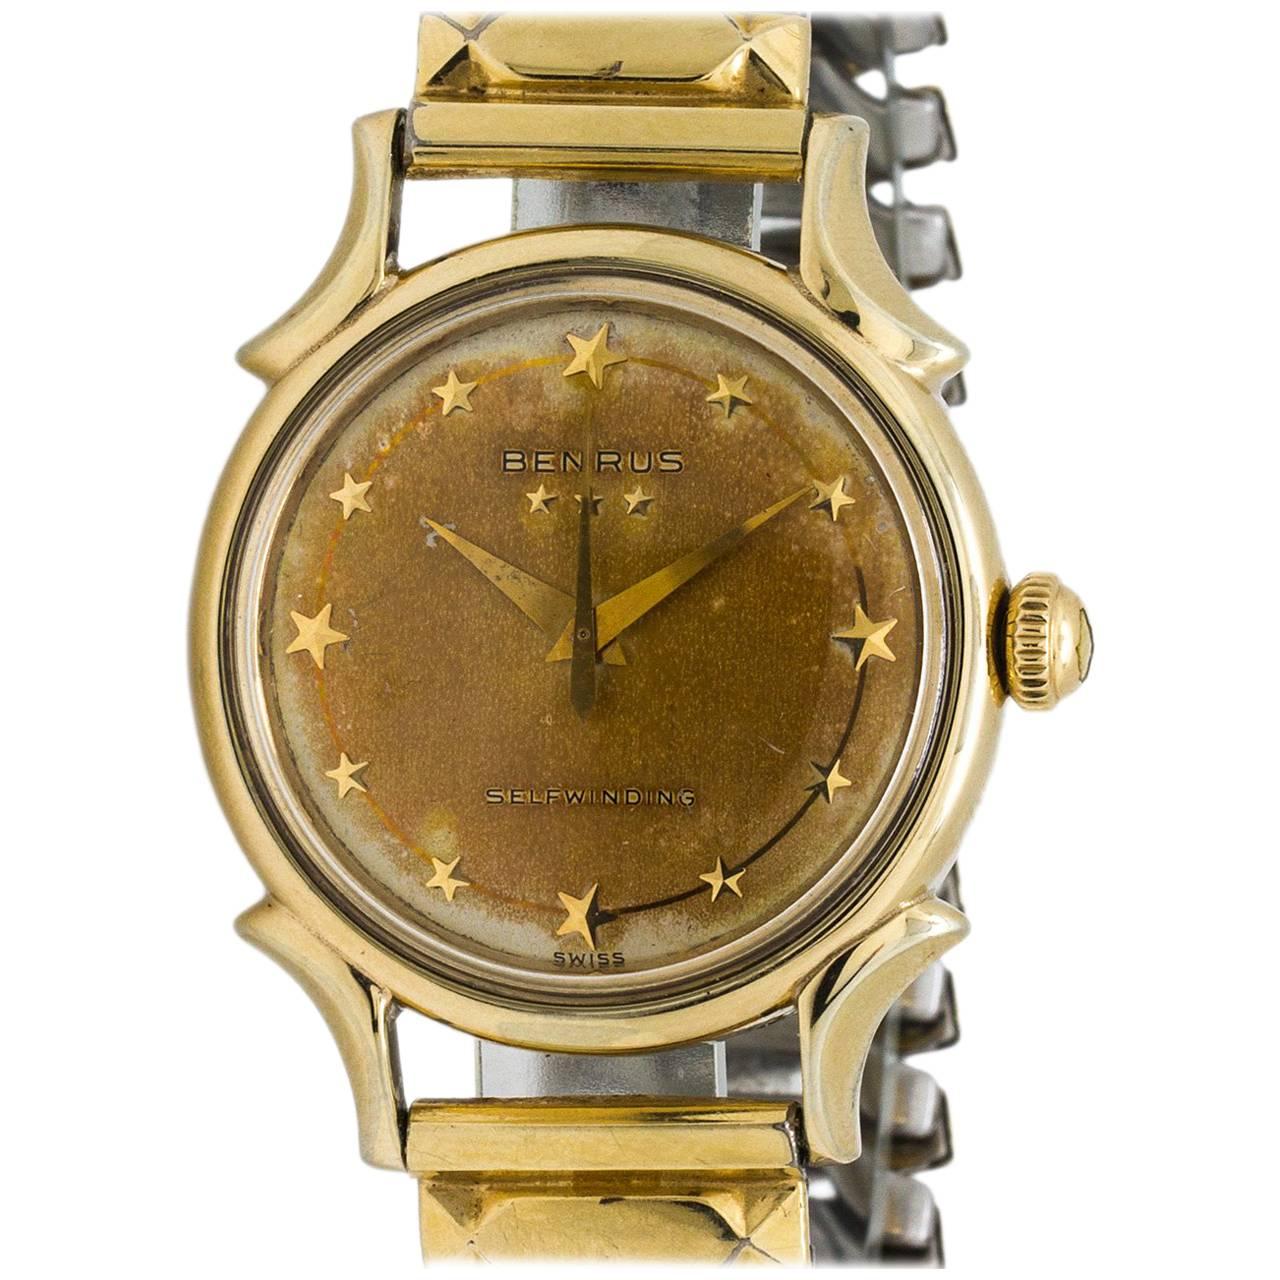 Benrus Gold-Filled Star Dial Automatic Wristwatch, circa 1959